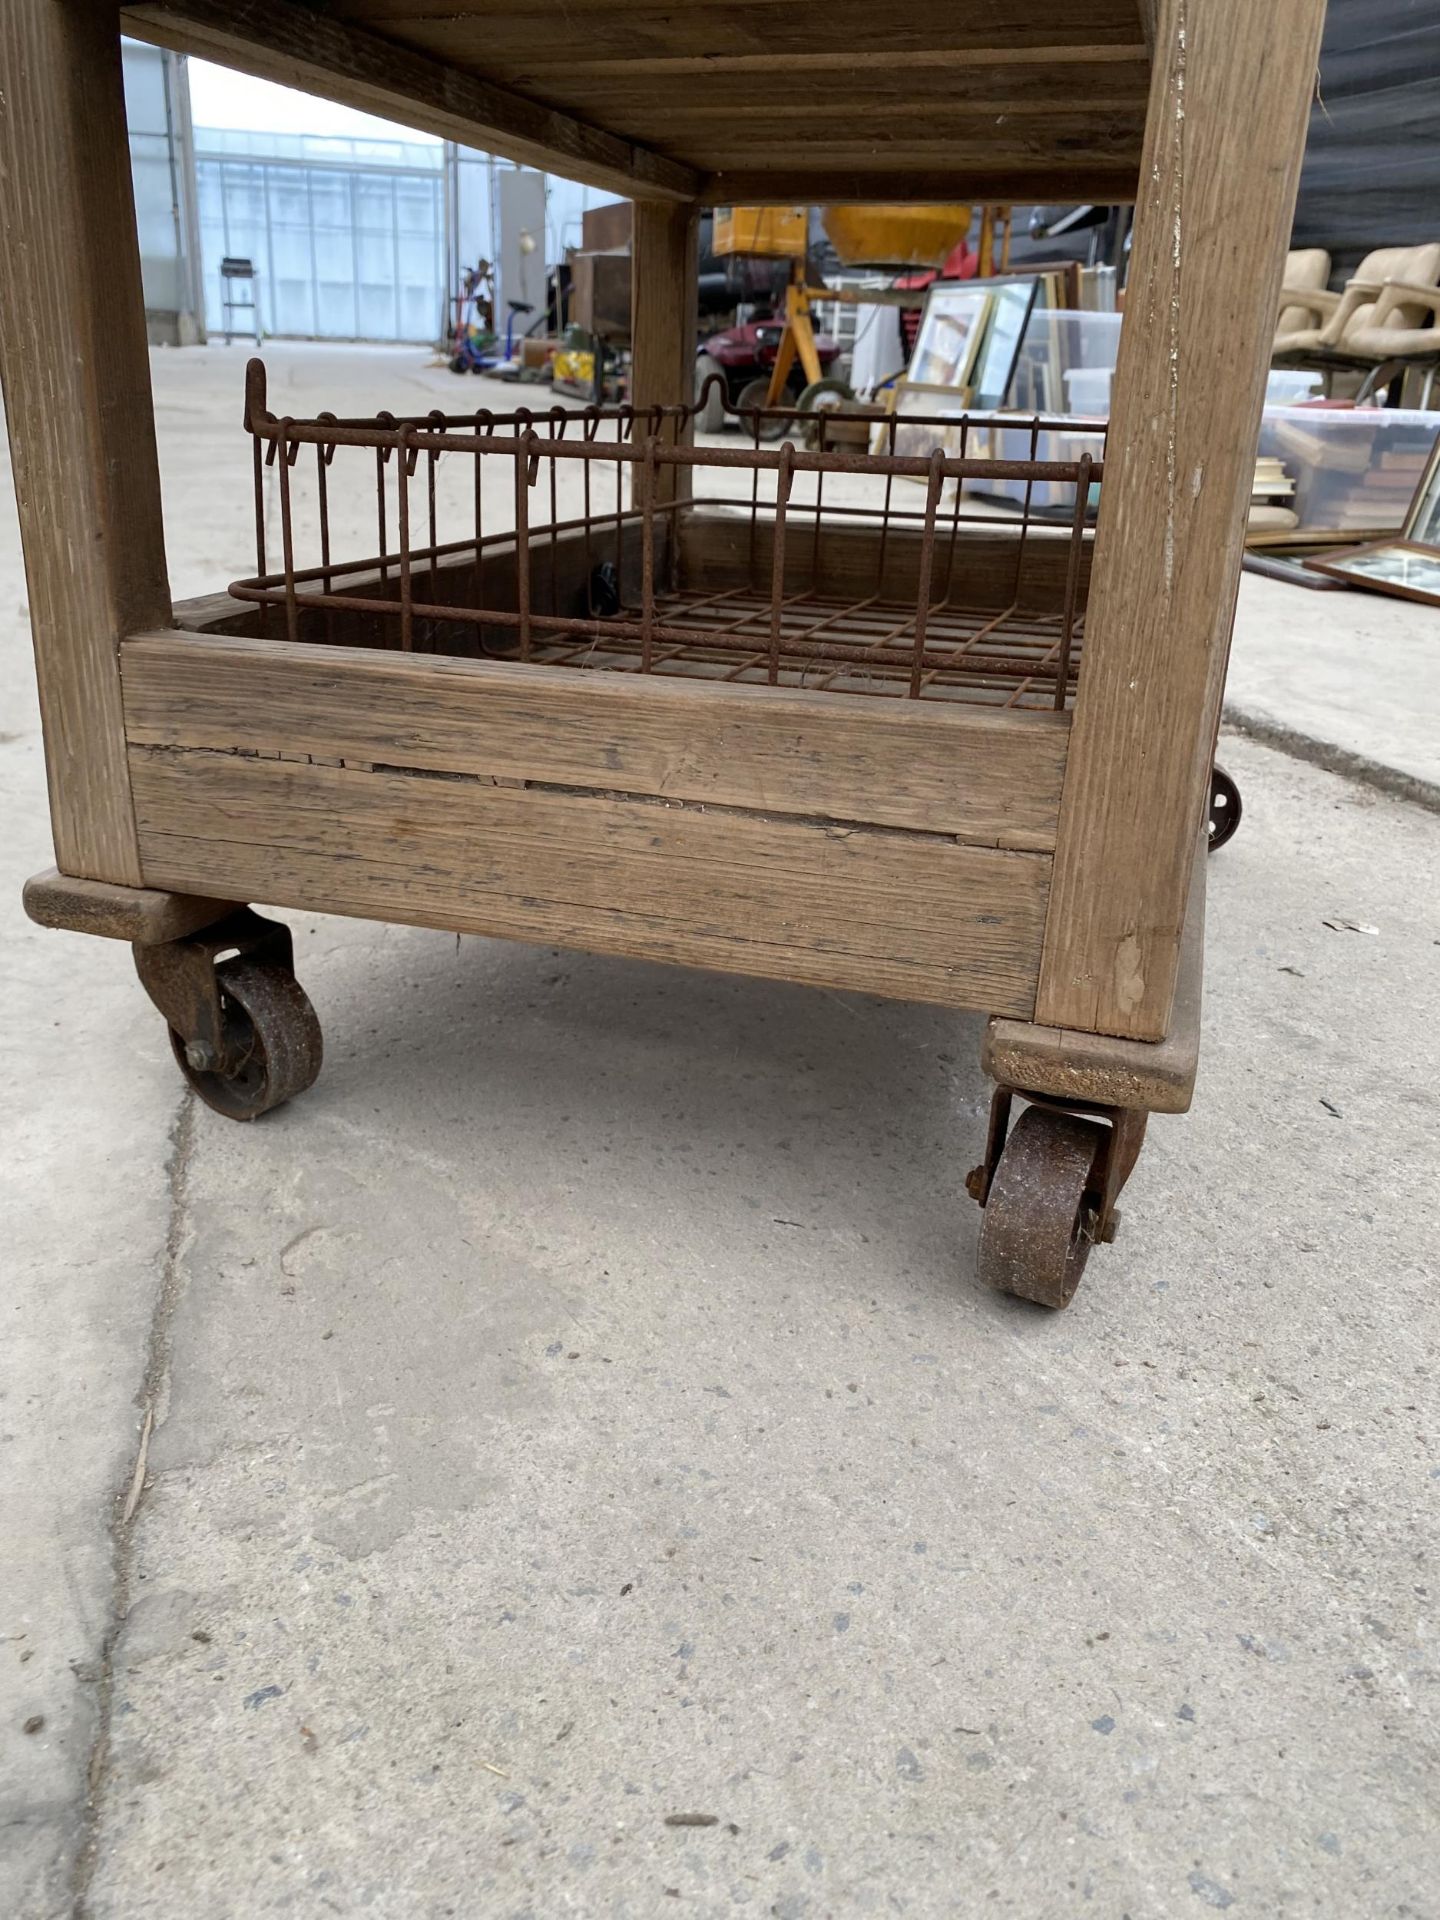 A TALL RUSTIC FOUR TIER WOODEN FOUR WHEELED STAND WITH WIRE BASKET TRAYS - Image 4 of 6